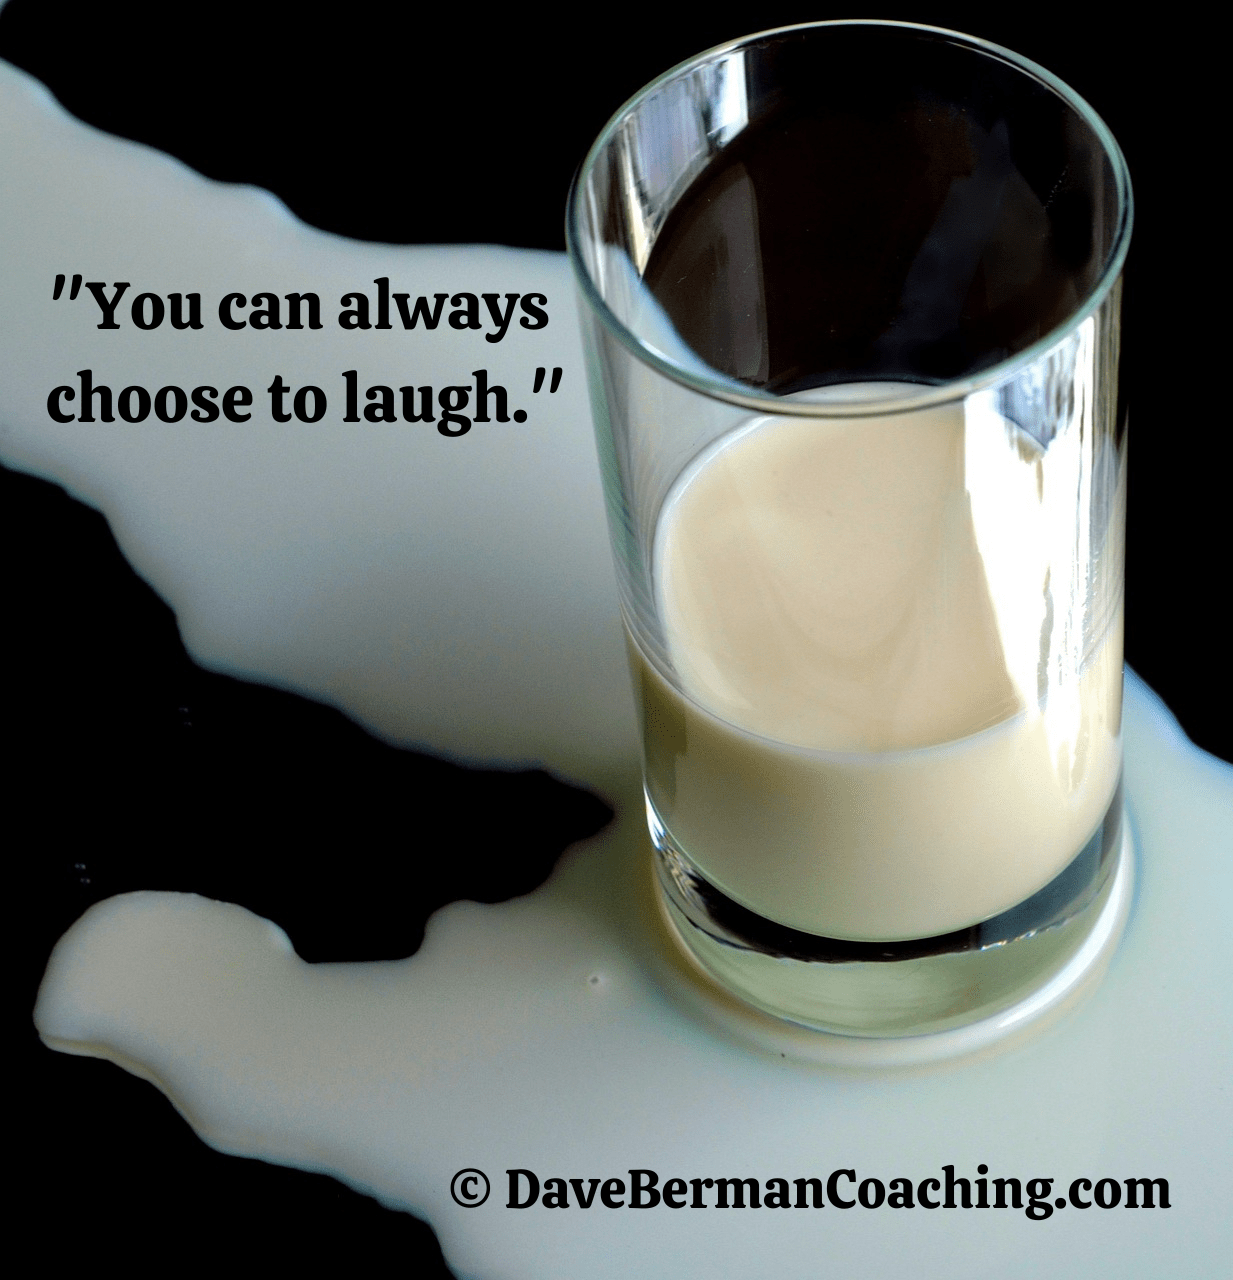 A half full glass of milk stands in a puddle of milk on a black table. Caption: "You can always choose to laugh." ~ © DaveBermanCoaching.com